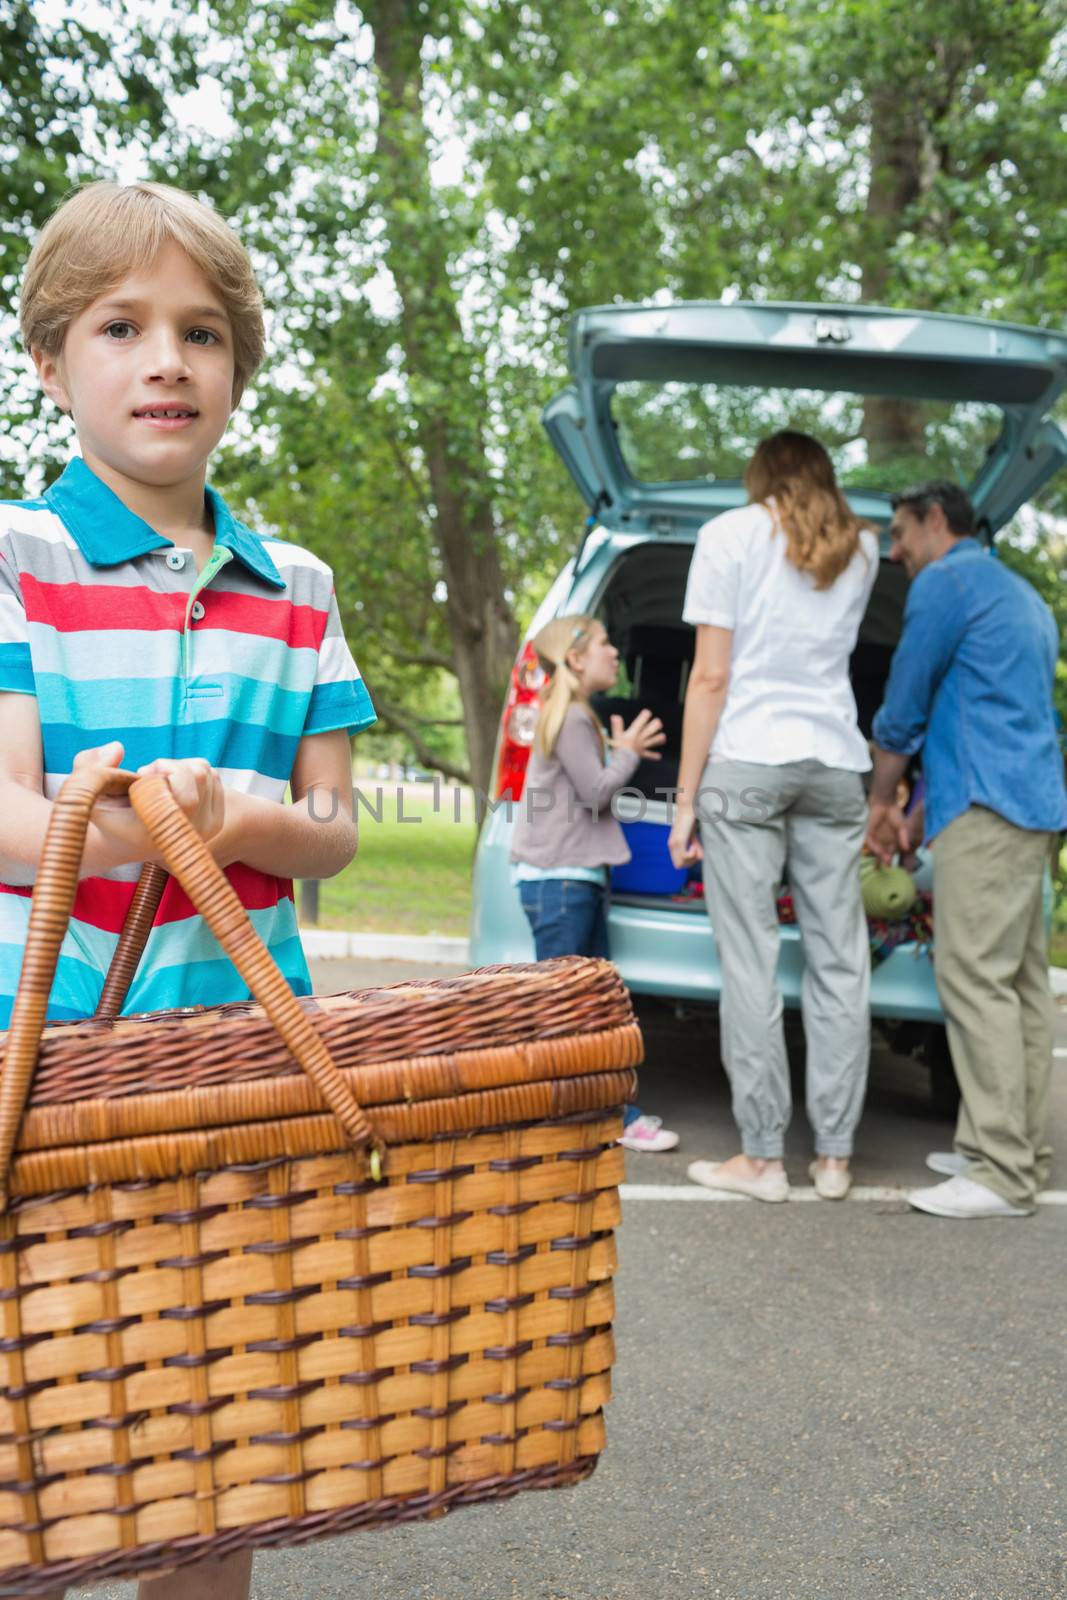 Portrait of a boy with picnic basket while family in background at car trunk